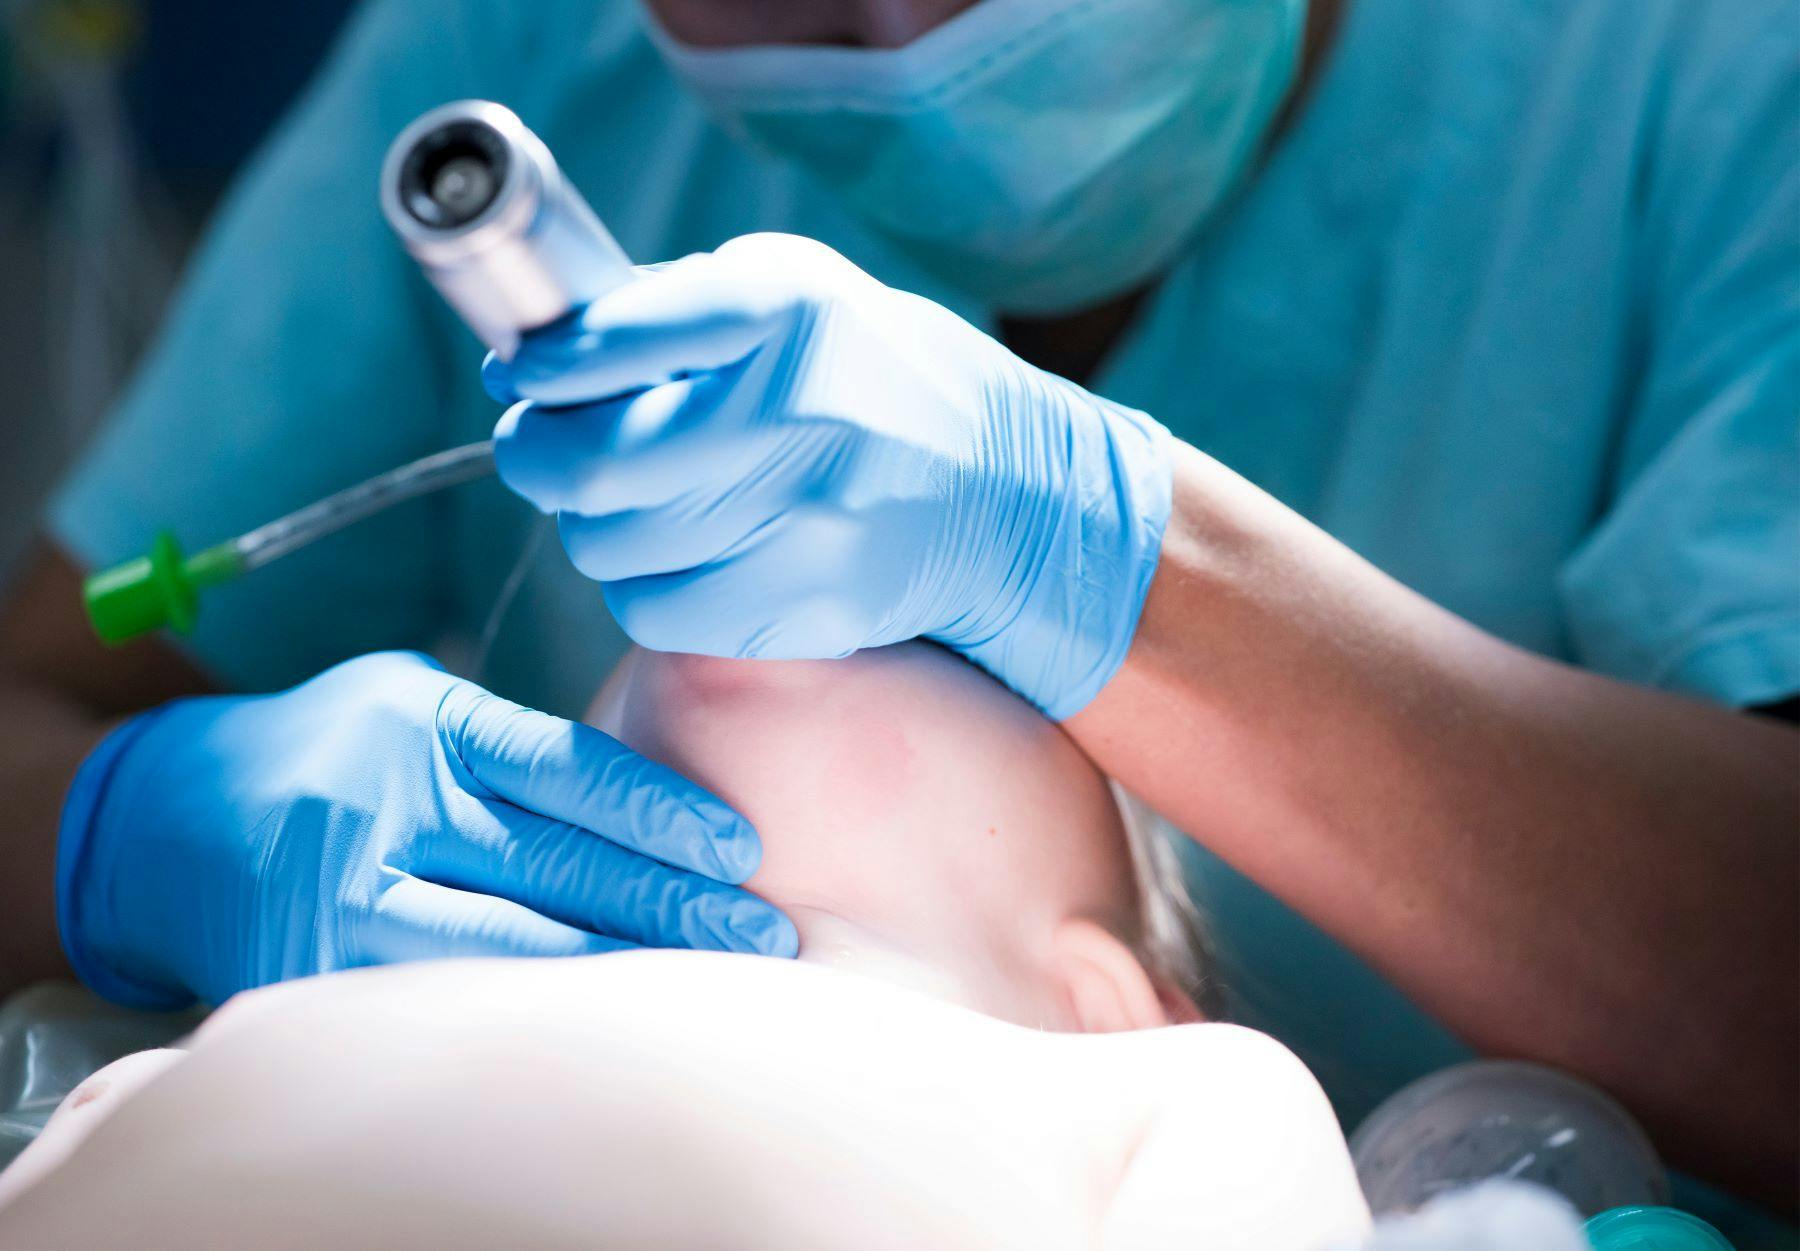 Anesthesiologist performs intubation